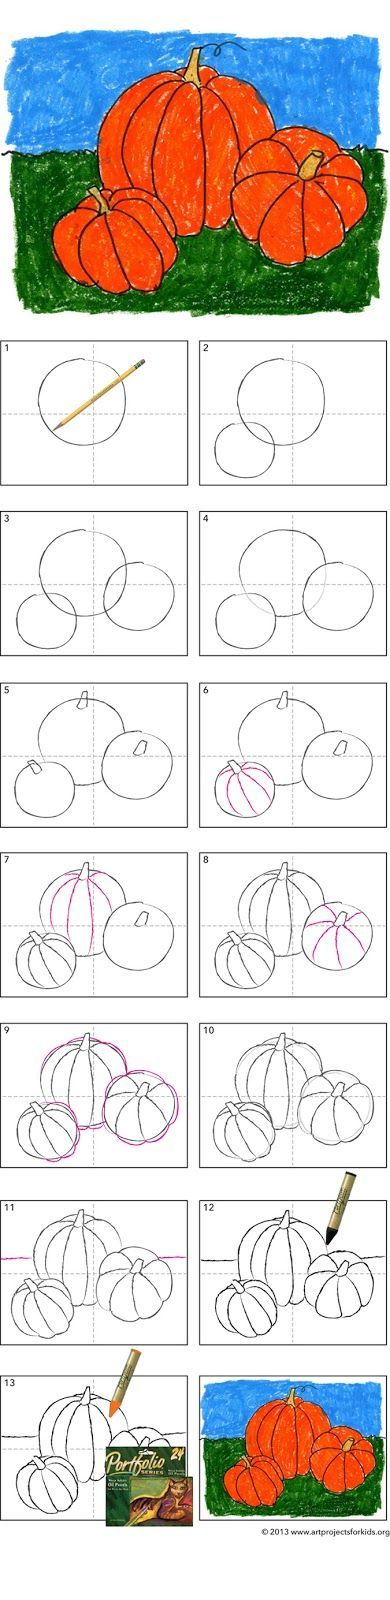 How to Draw a Pumpkin Tutorial | Do weekly “how-to” as brain break (rather than as art project)…kids would love it!